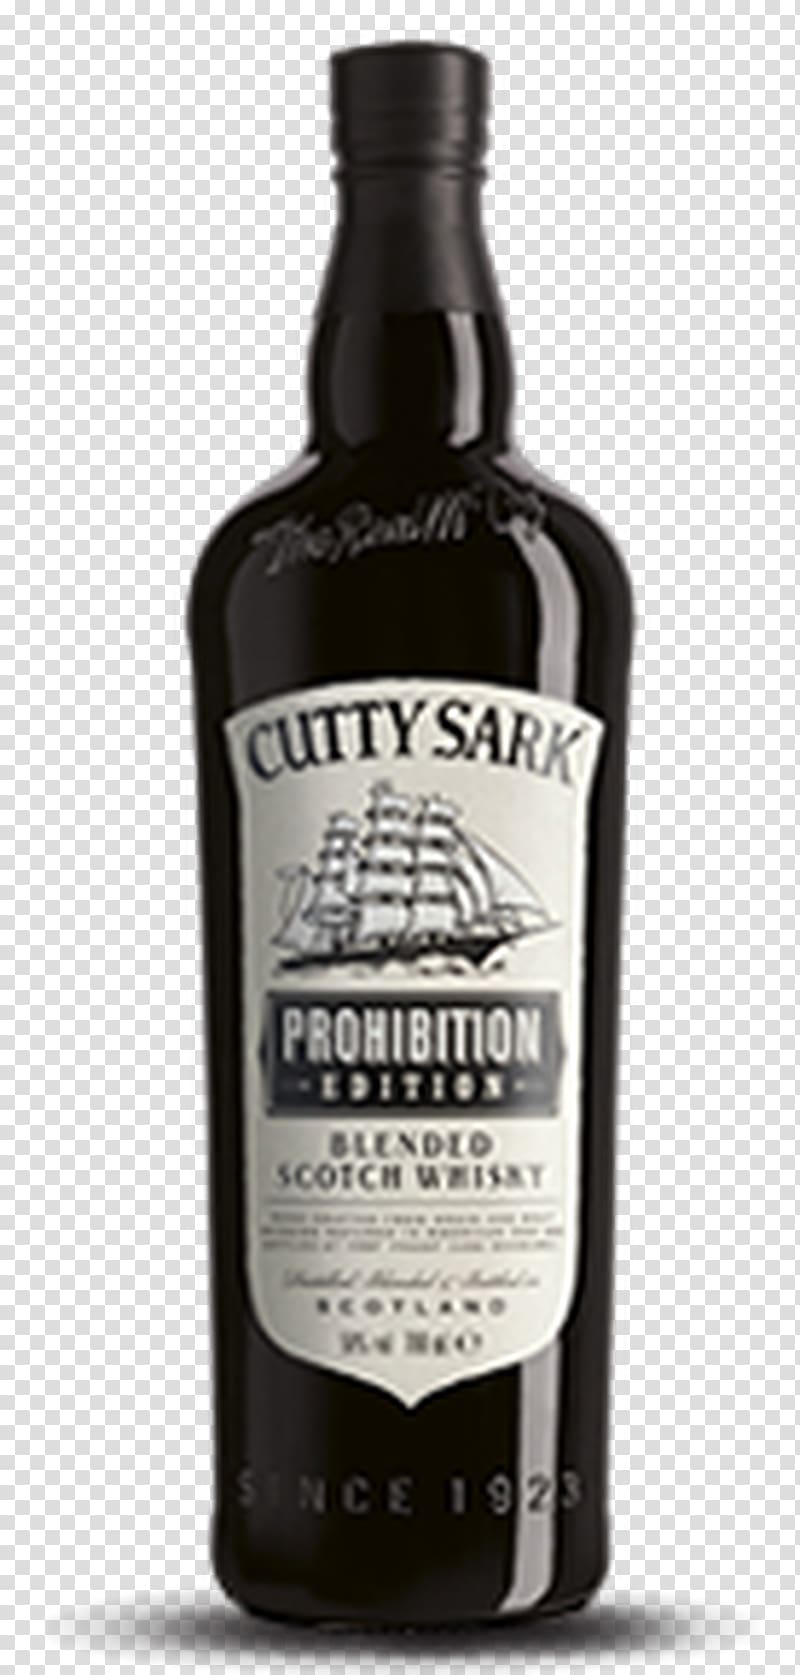 Cutty Sark Scotch whisky Blended whiskey Prohibition in the United States, bottle transparent background PNG clipart